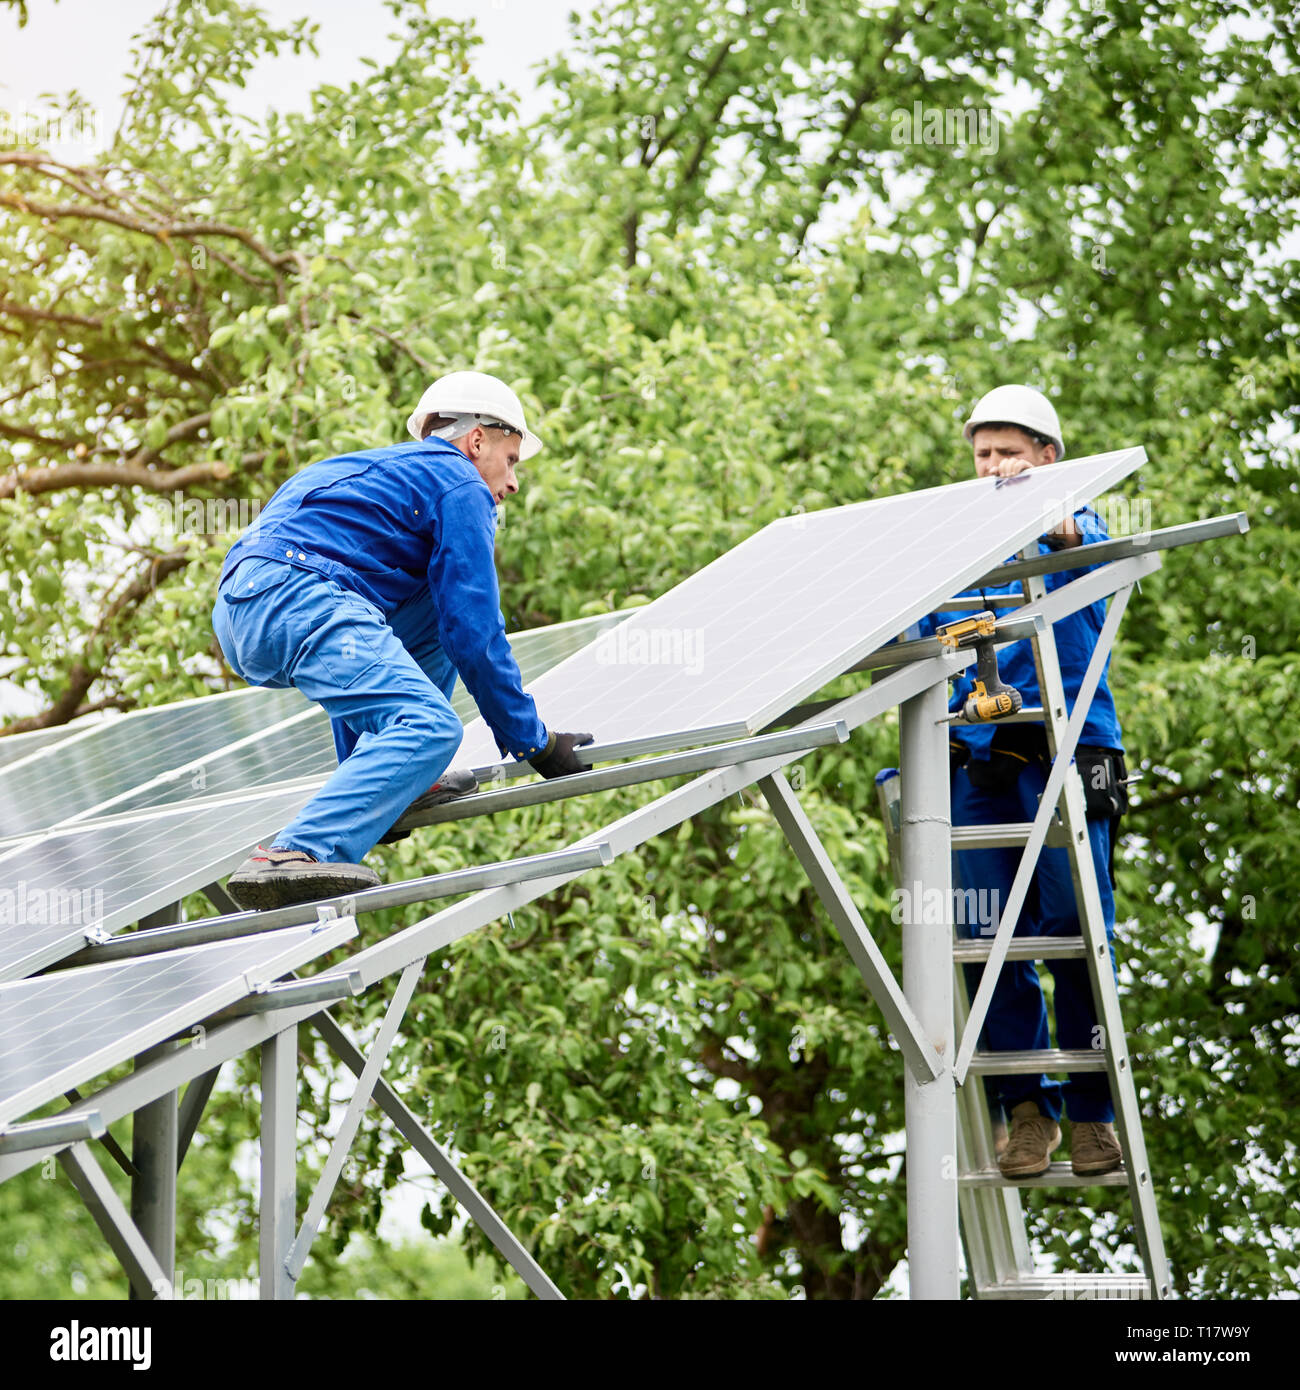 Installing of stand-alone solar photo voltaic panel system. Two workers assembling solar modules on metal platform on green tree background. Alternati Stock Photo